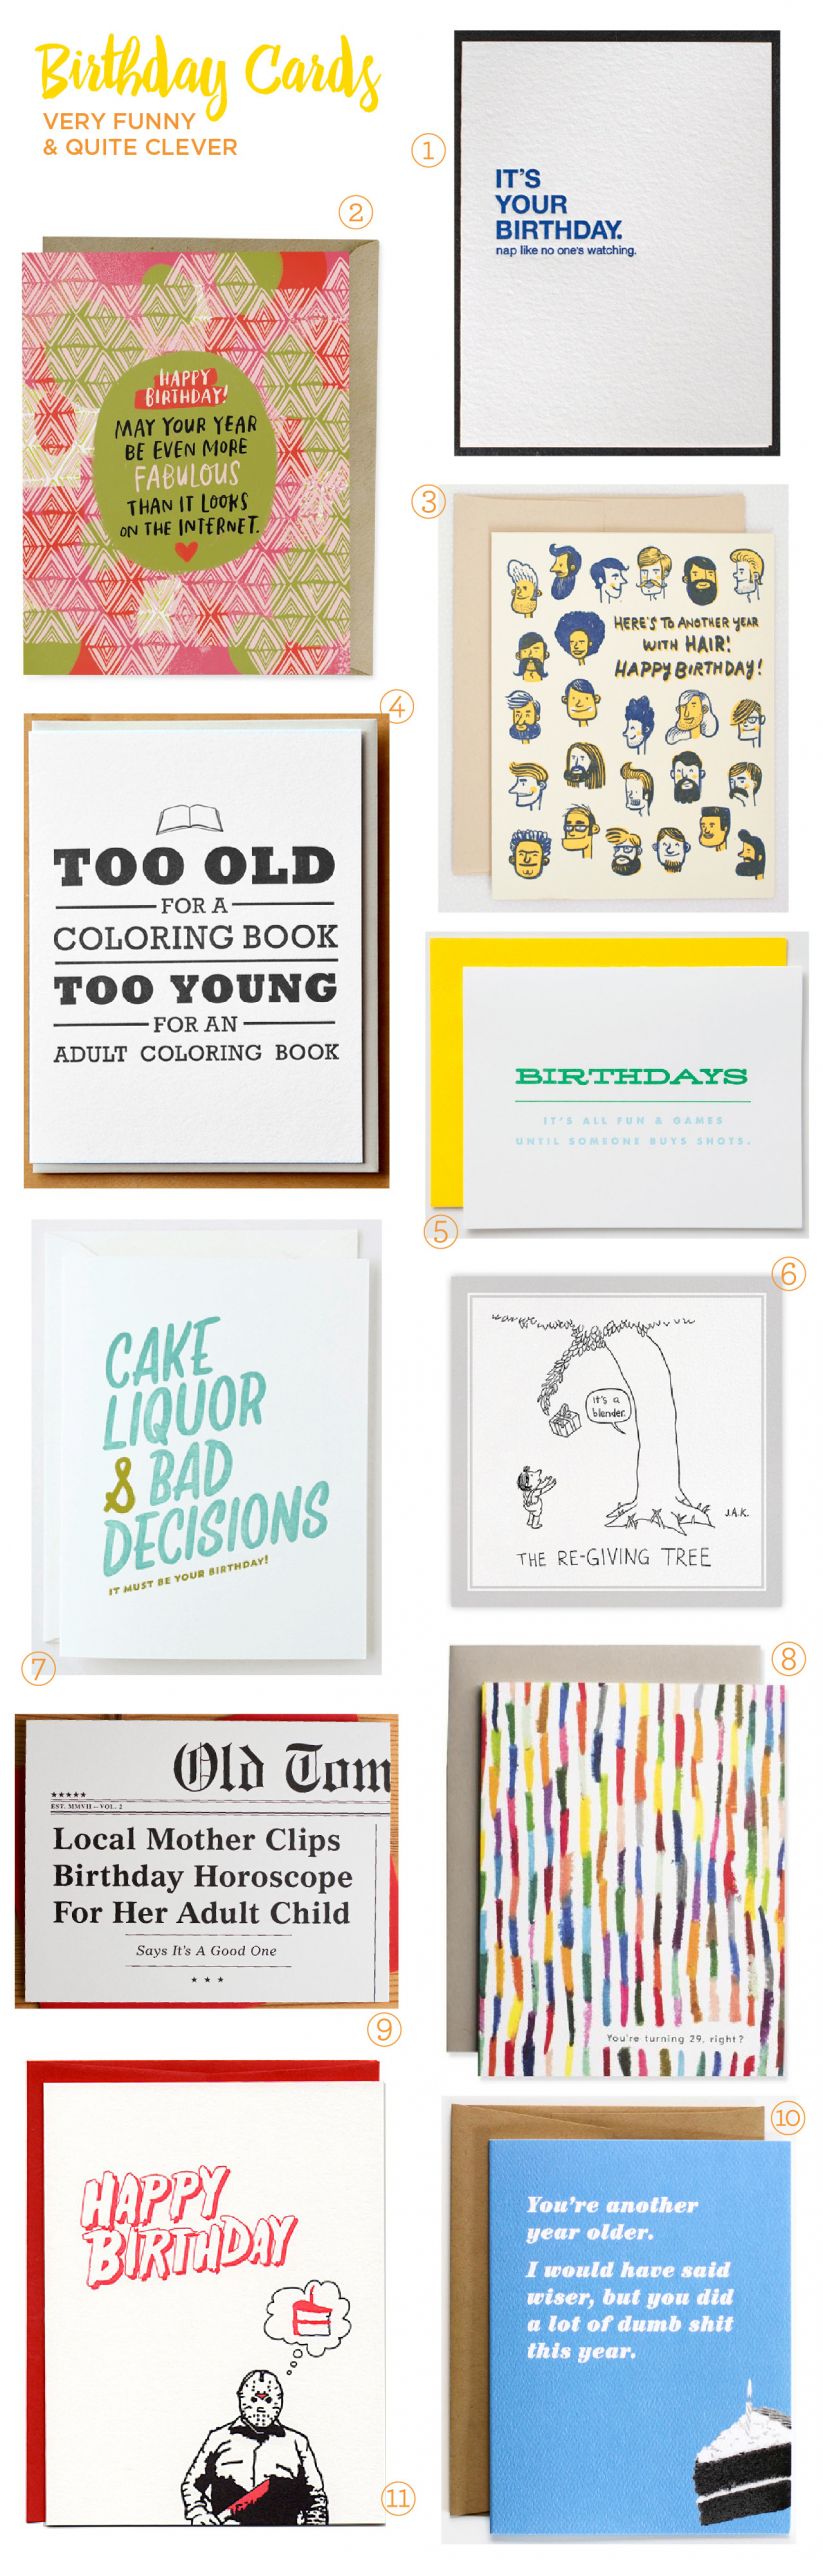 Clever Birthday Cards
 Stationery A Z Clever and Funny Birthday Cards